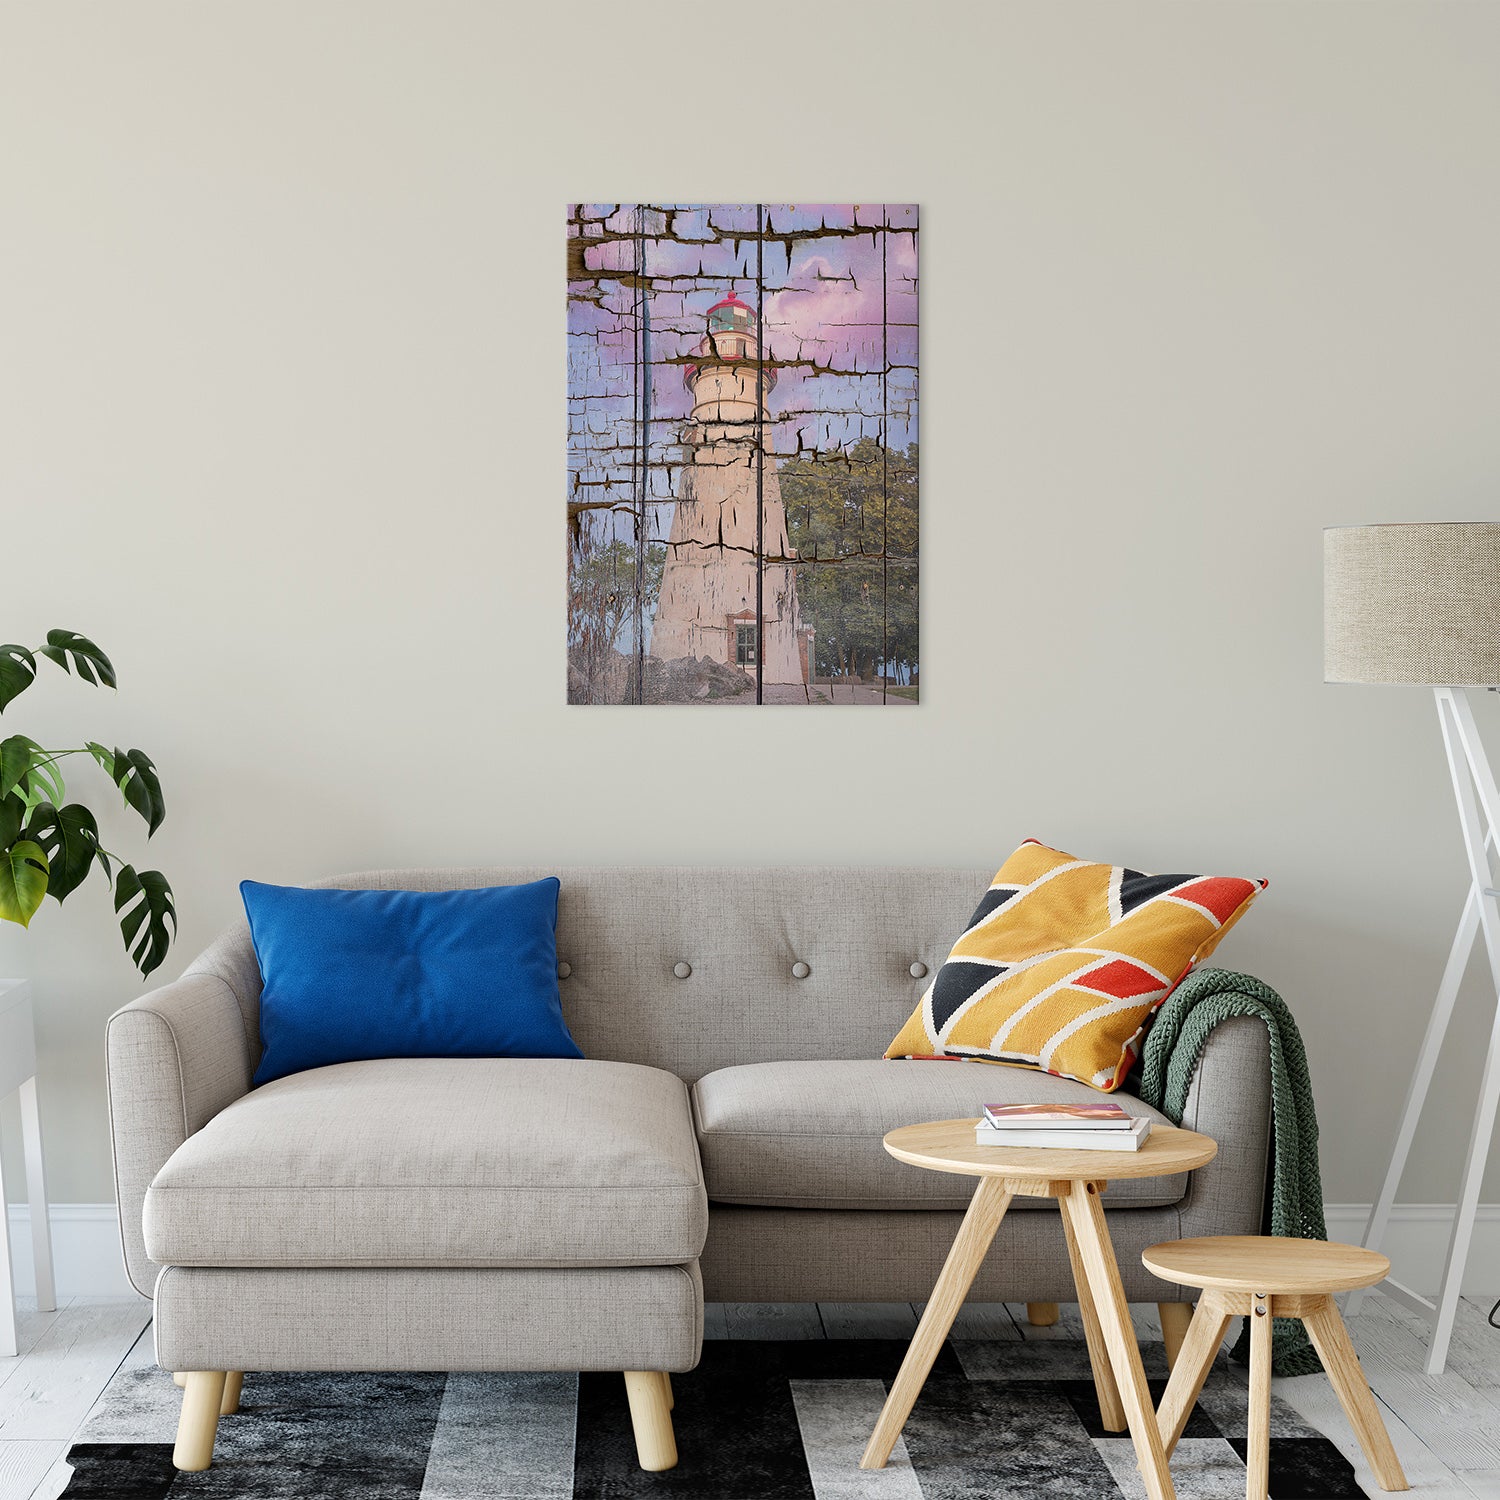 Faux Wood Texture Marblehead Lighthouse at Sunset Fine Art Canvas Wall Art Prints 24" x 36" - PIPAFINEART